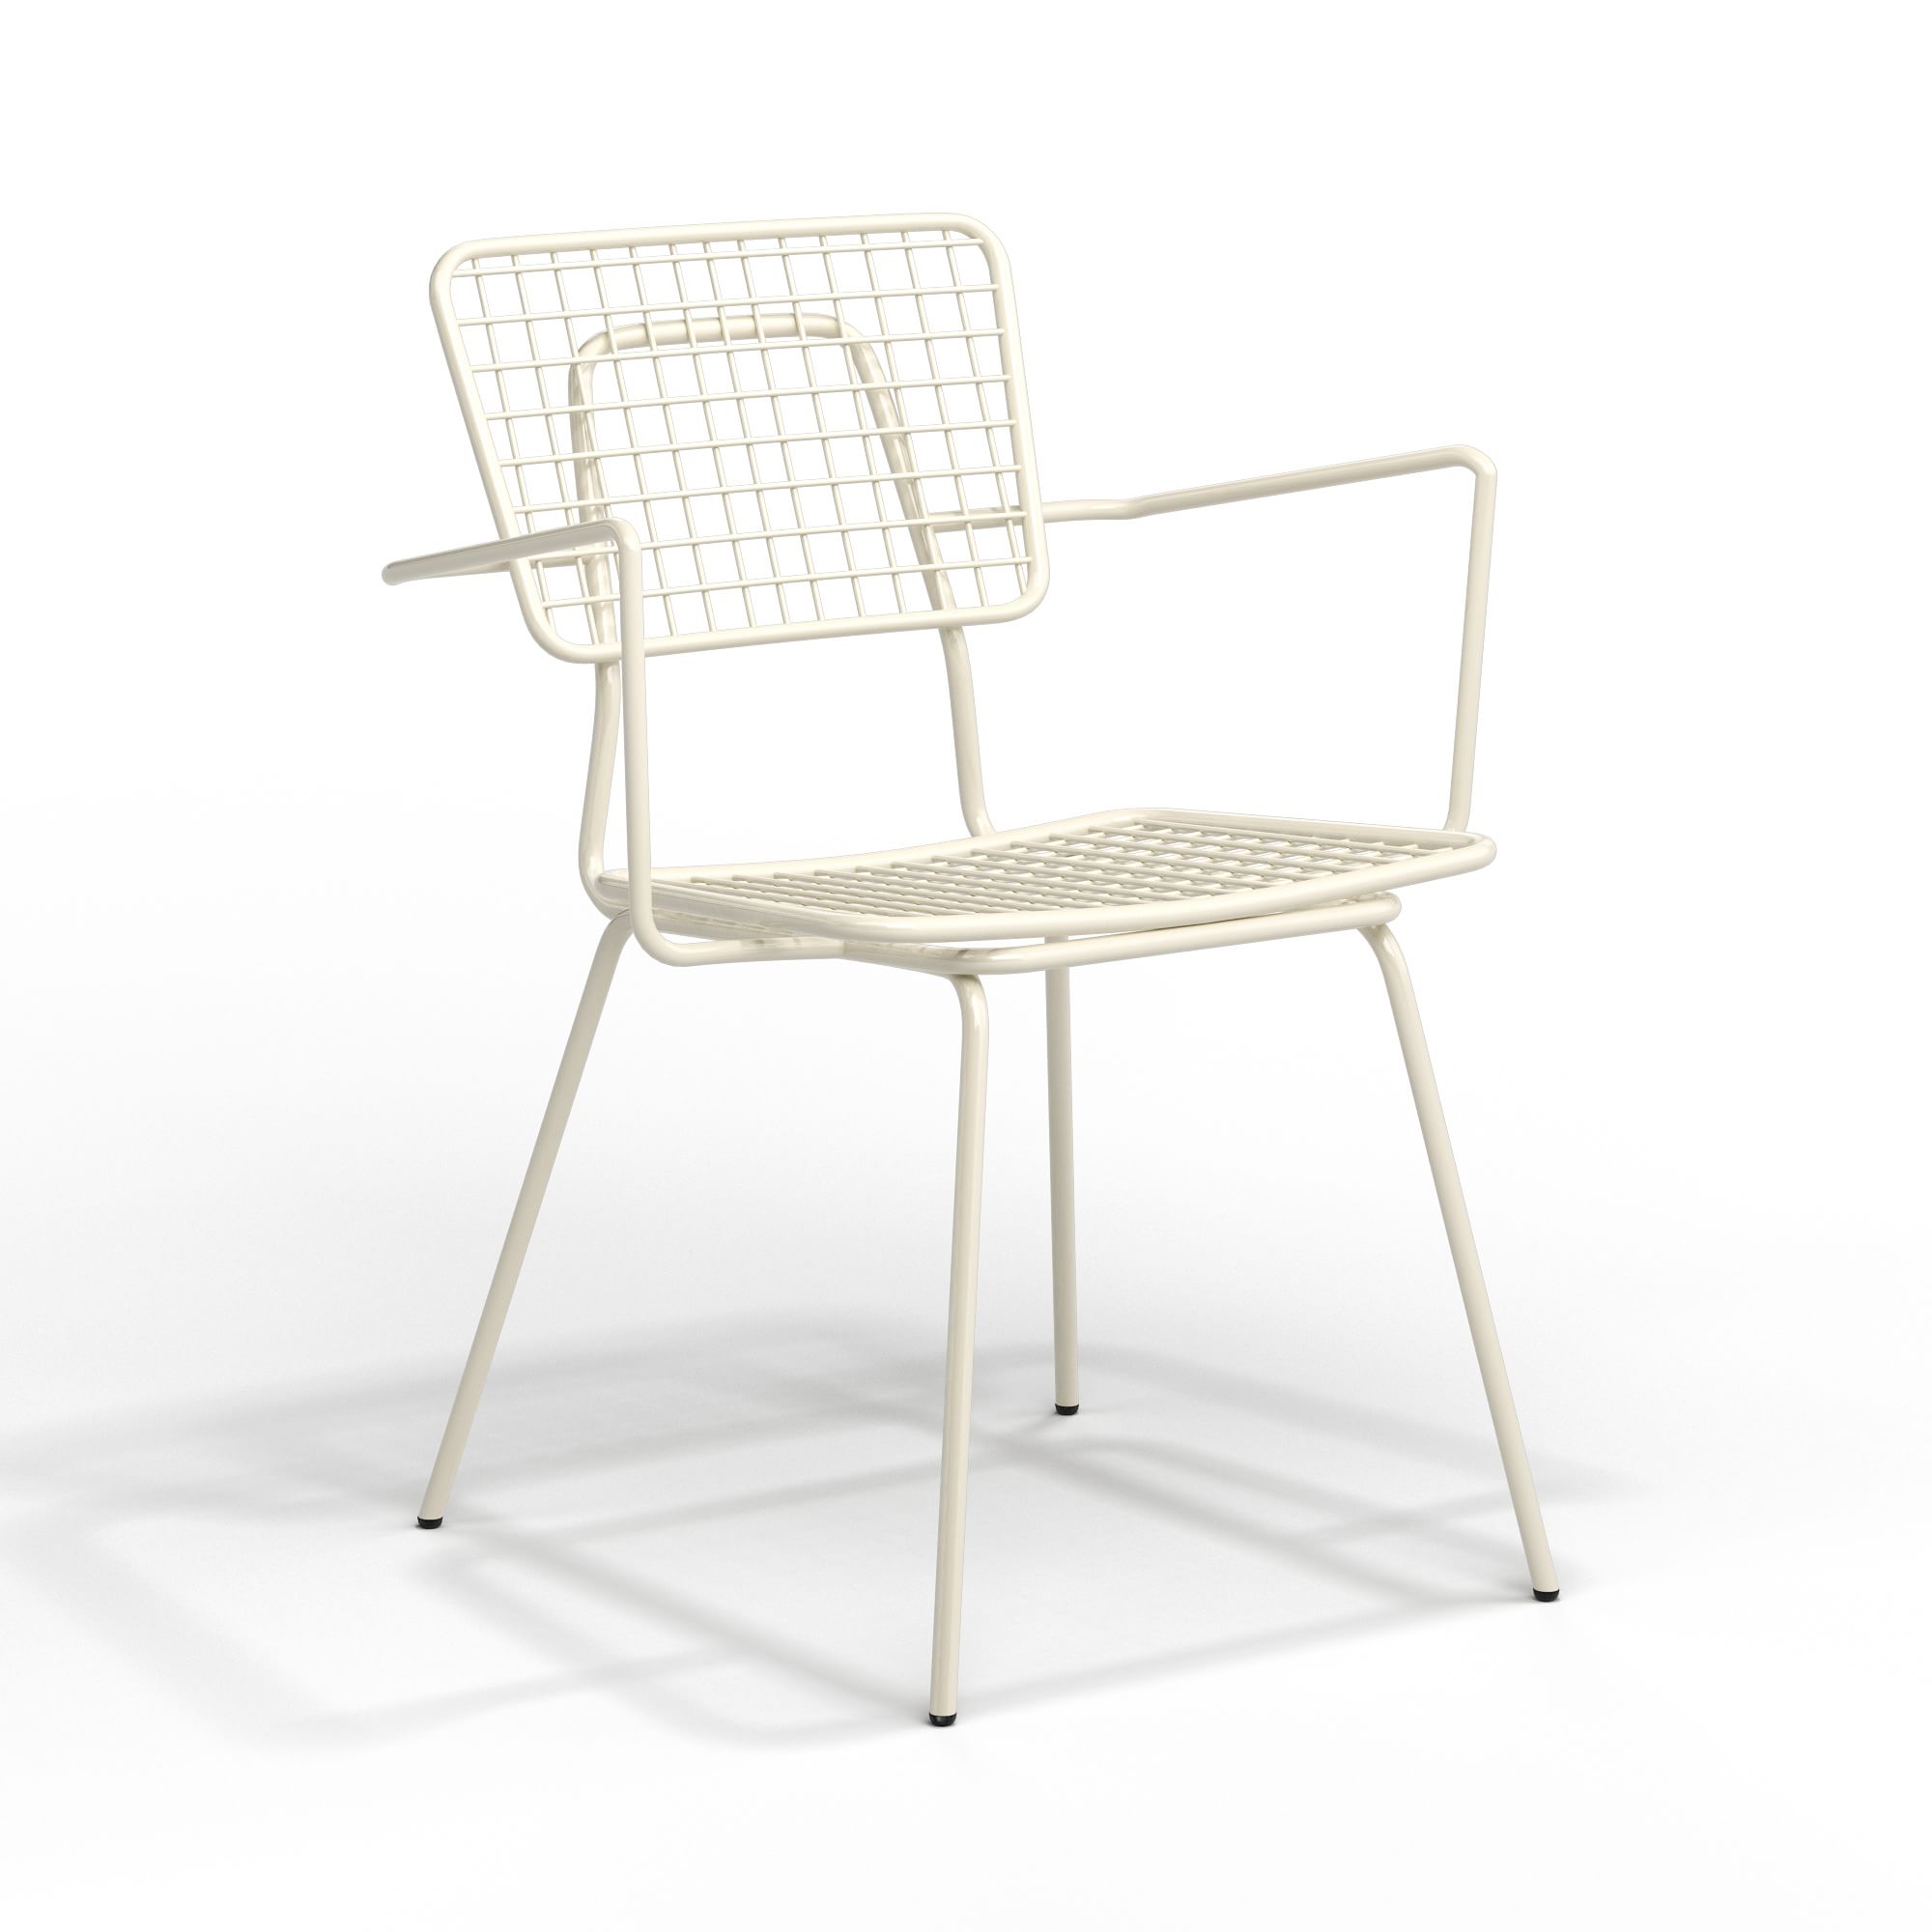 Grand Rapids Chair Co. Opla Outdoor w/ Arms | West Elm